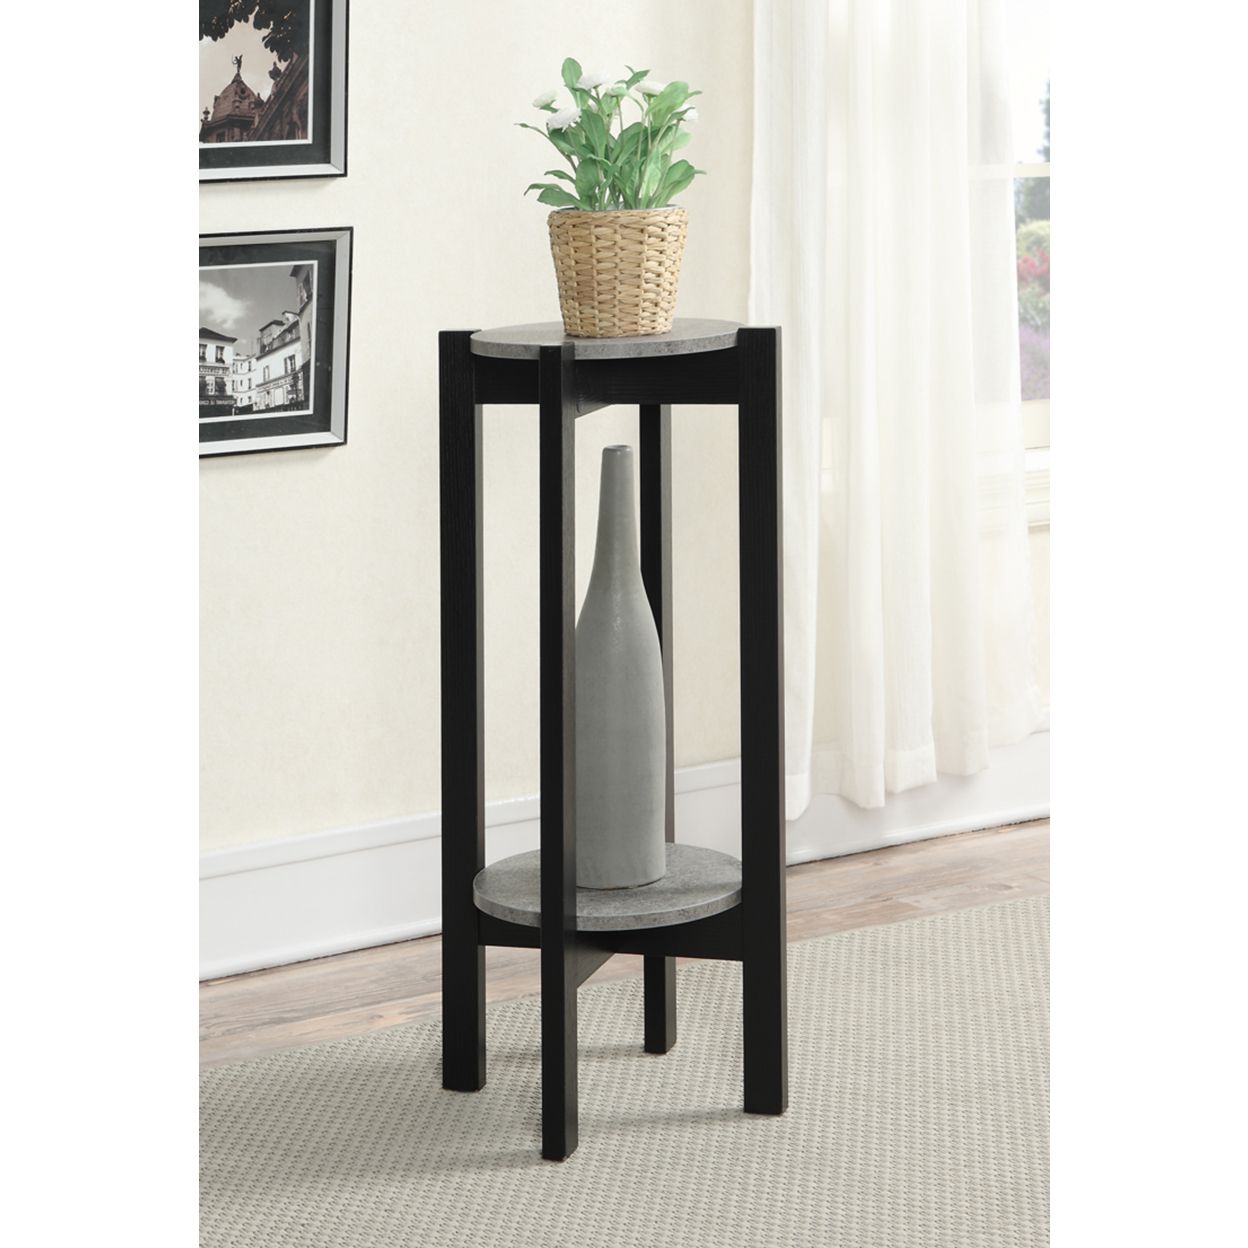 Deluxe Plant Stands Throughout Most Up To Date Newport Deluxe 2 Tier Plant Stand, Faux Cement/black – Walmart (View 3 of 15)